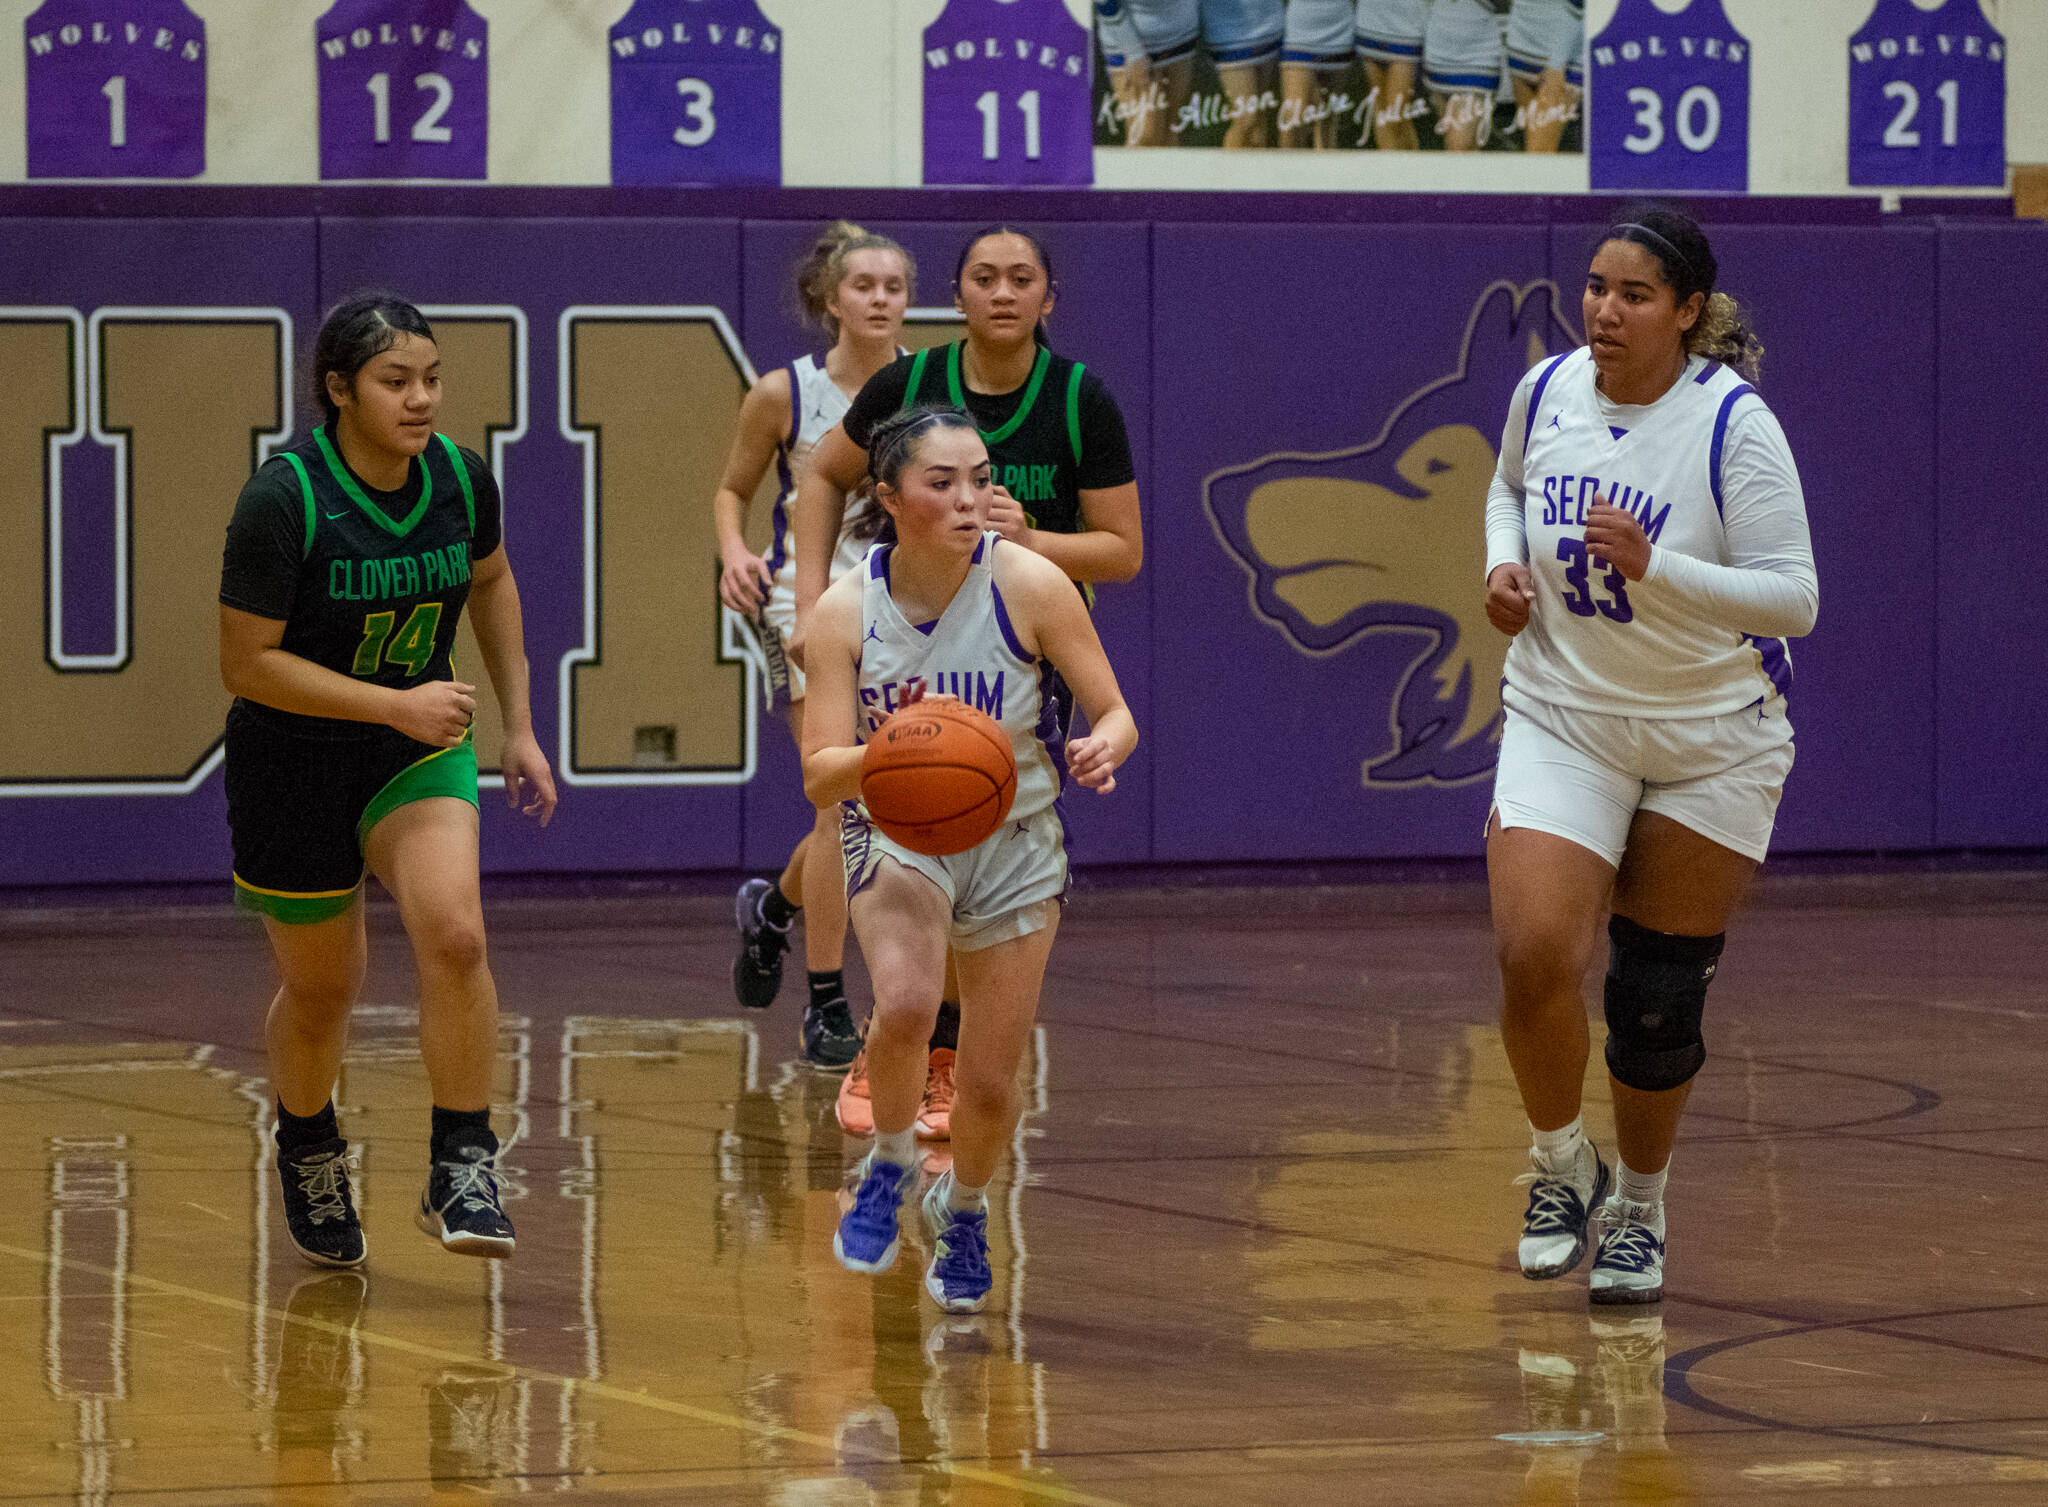 Sequim Gazette photo by Emily Matthiessen / Sequim guard Hannah Bates, center, and teammate Jelissa Julmist go on the offensive as Clover Park’s Marlene Iafeta pursues, in the Wolves’ 65-29 district tourney-opening win at home on Feb. 14. Bates led the team with 15 points and Julmist added 13.